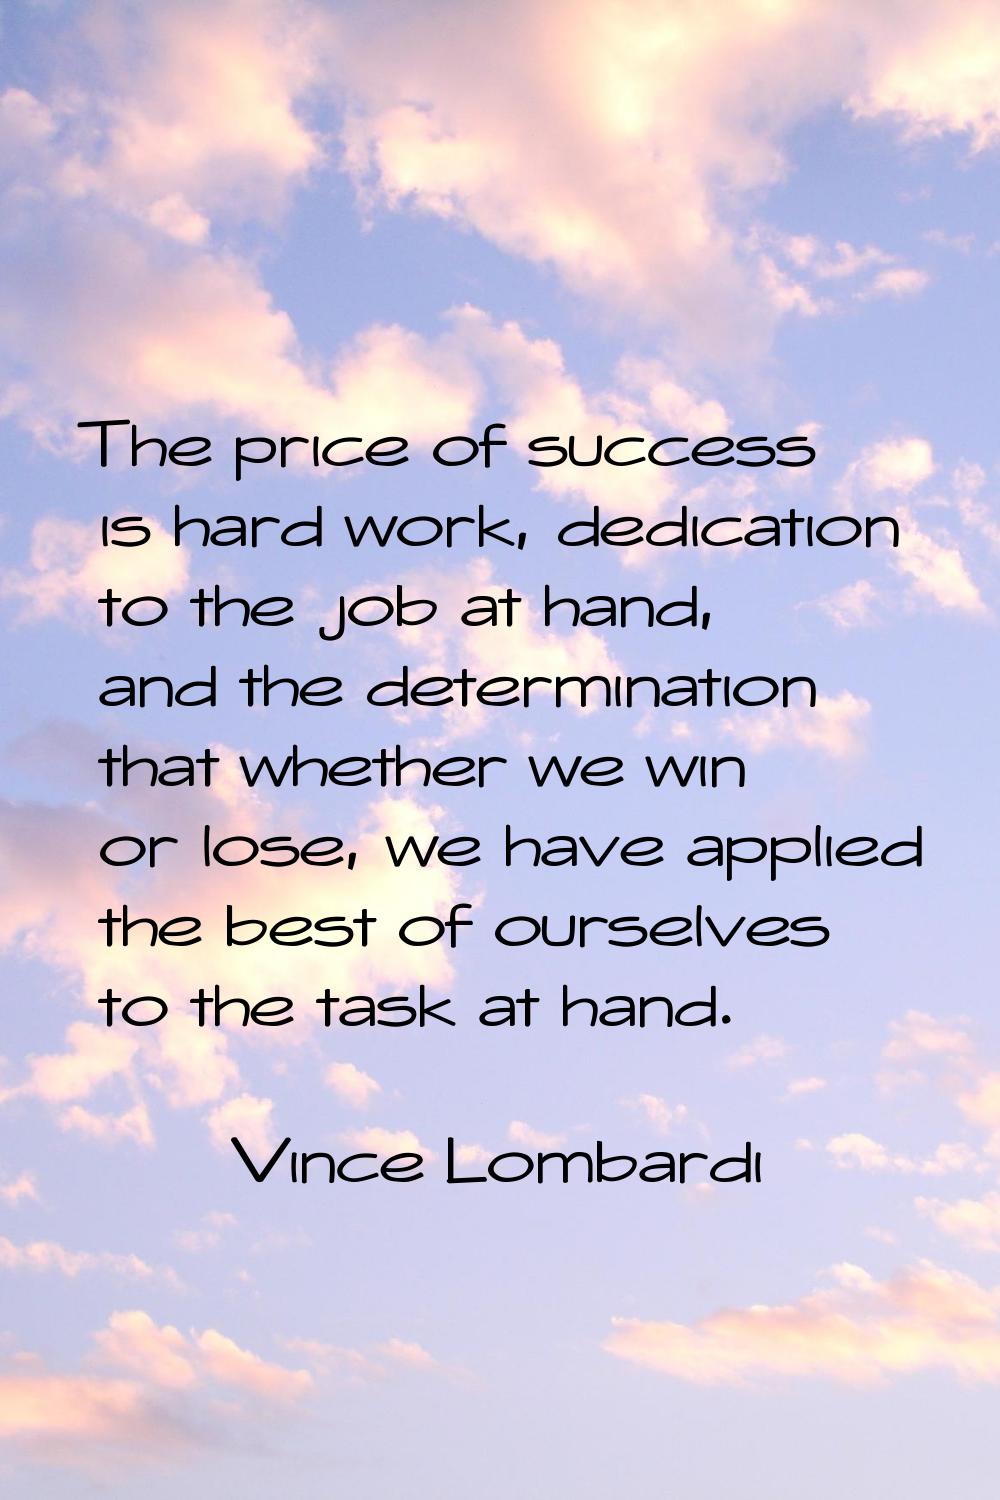 The price of success is hard work, dedication to the job at hand, and the determination that whethe